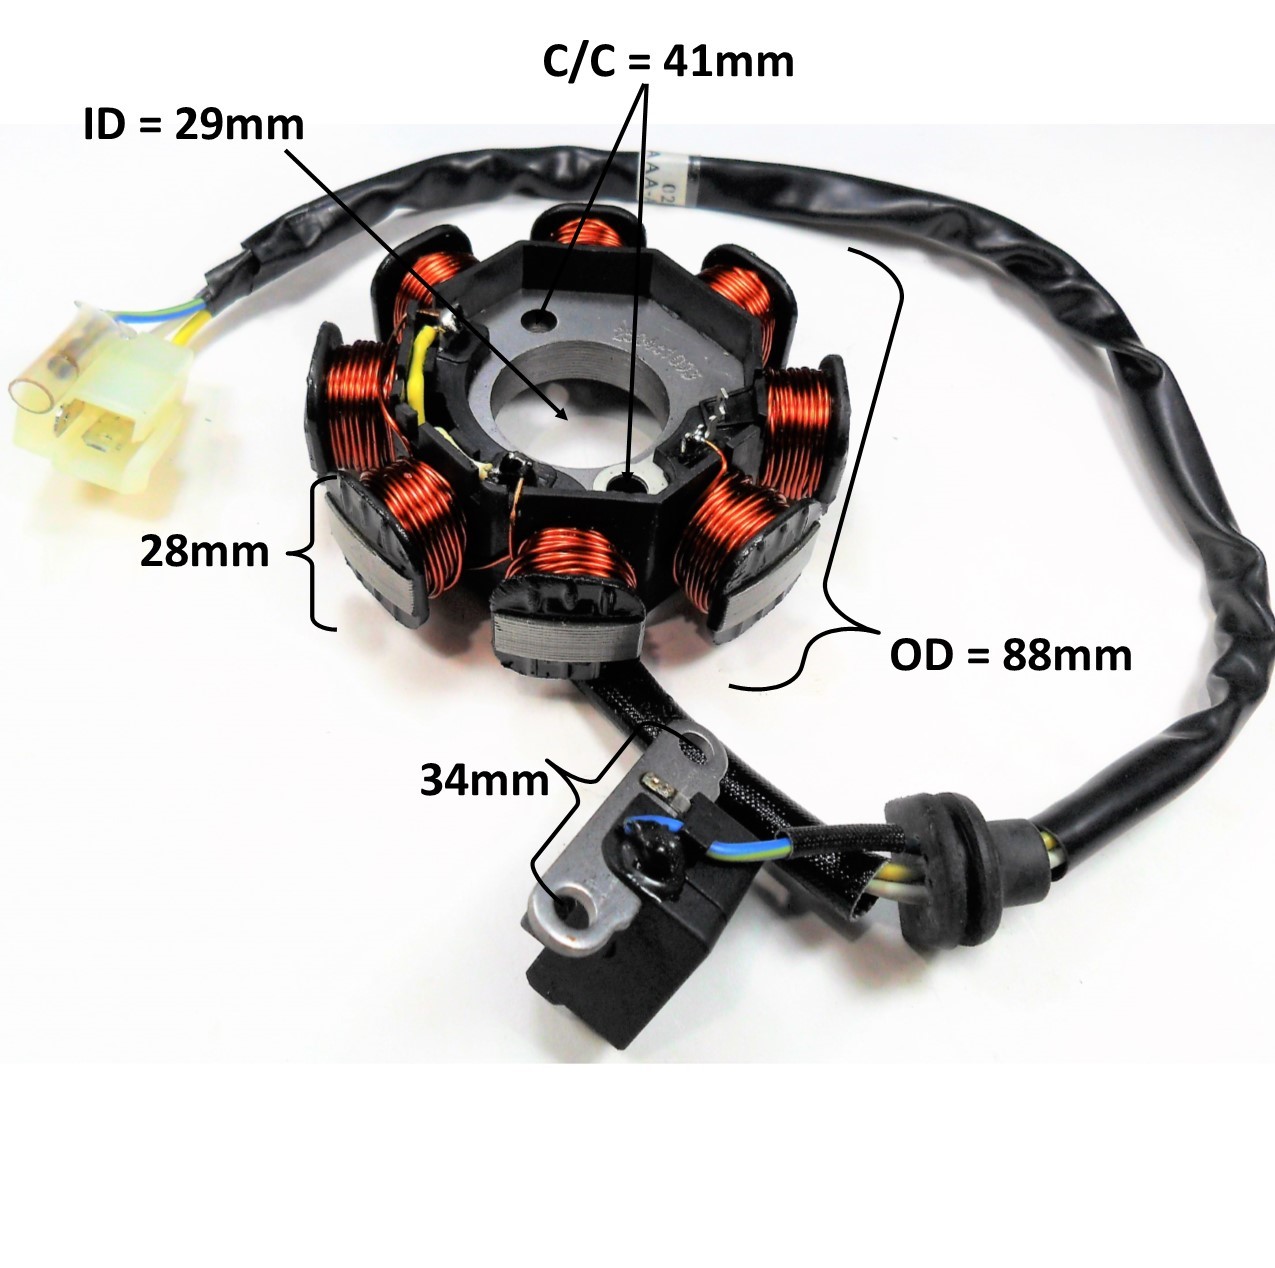 Stator 49-150cc 4 Stroke Fits E-Ton Sport 50, Tomos Nitro 50, 49cc Scooters + More. 8 Coil 2 Pin in 3 Pin Jack + 1 Wire OD=88 ID=29 H=28 Bolts c/c=41 Pickup Coil c/c=34 - Click Image to Close